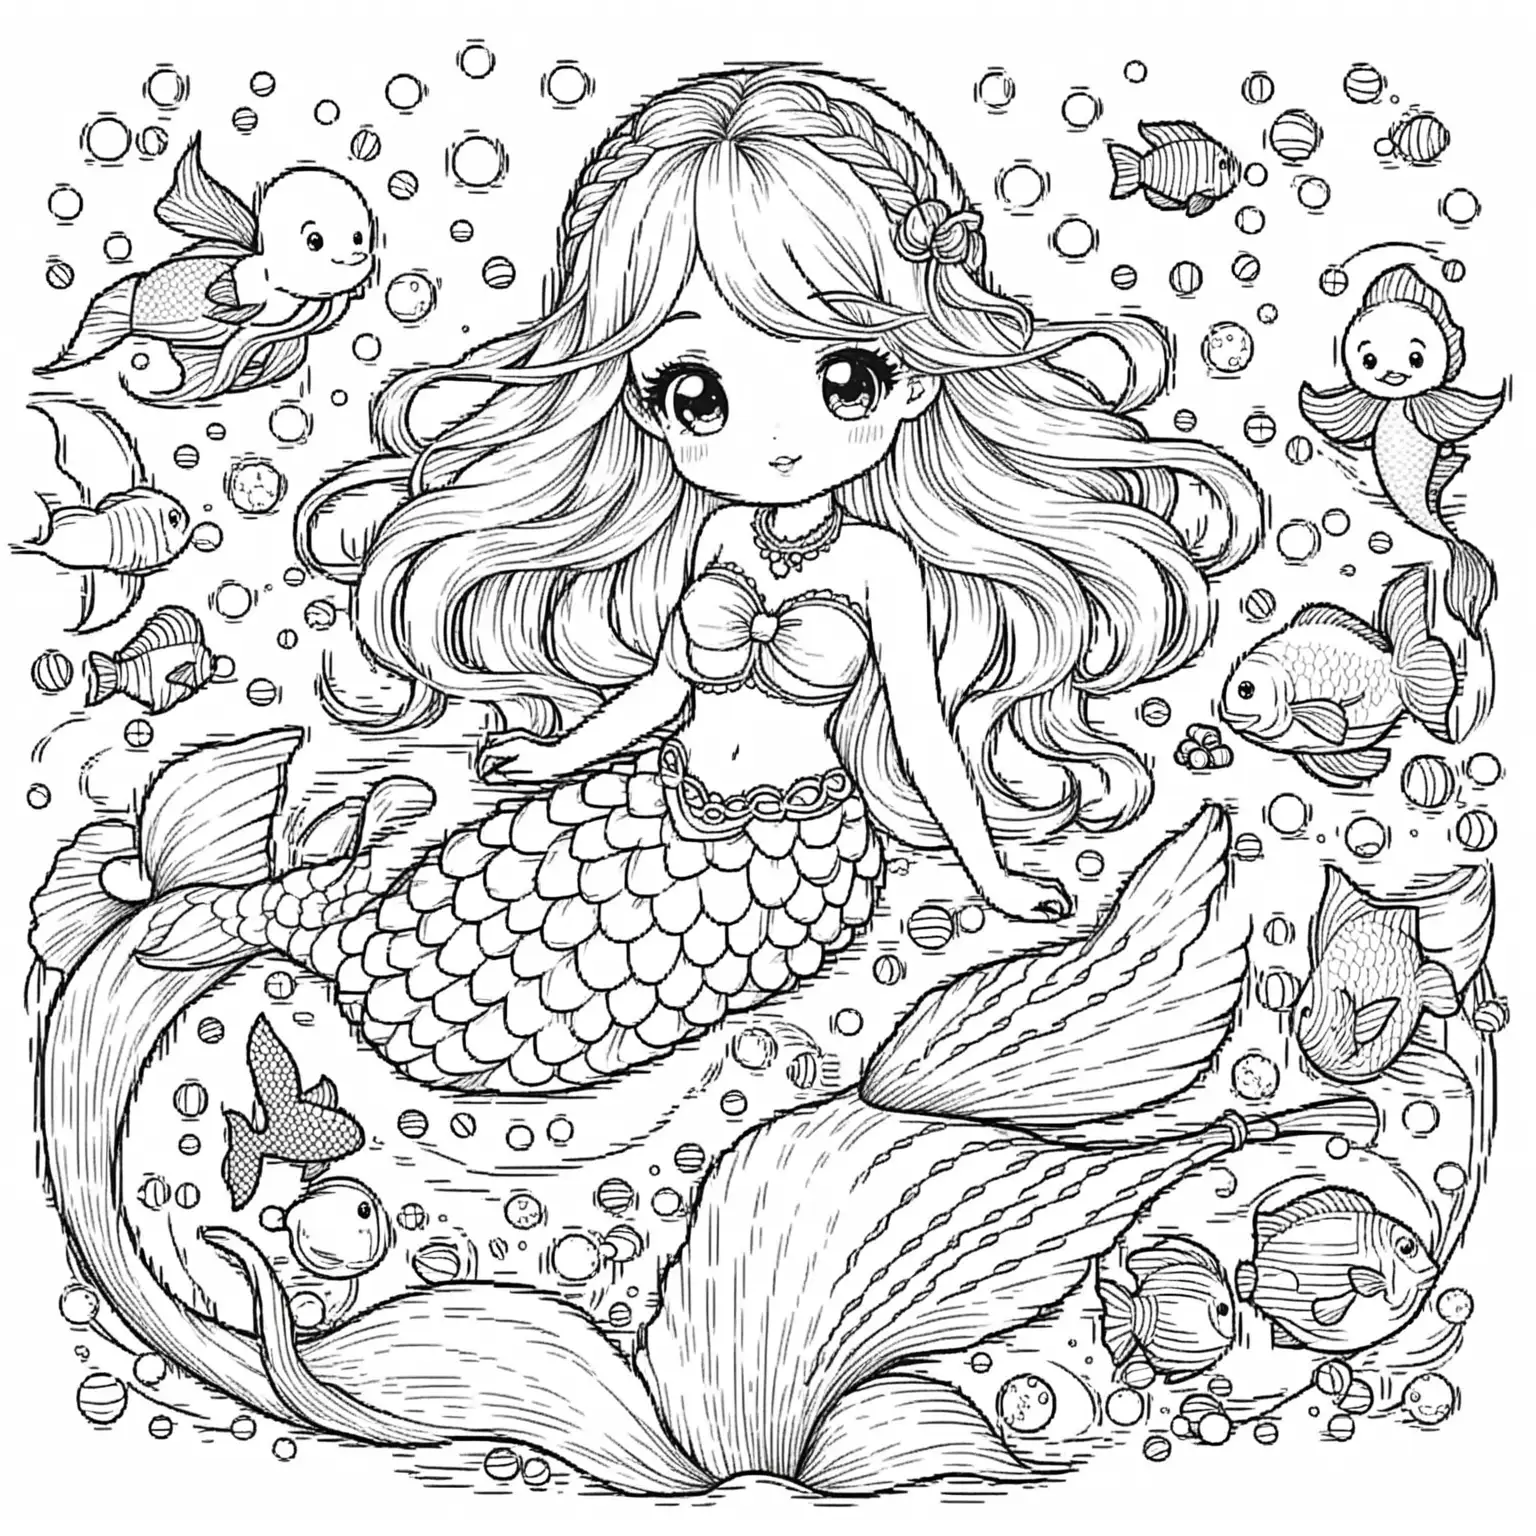 Cute Mermaid in Coloring Book Style with Toys on a Veranda